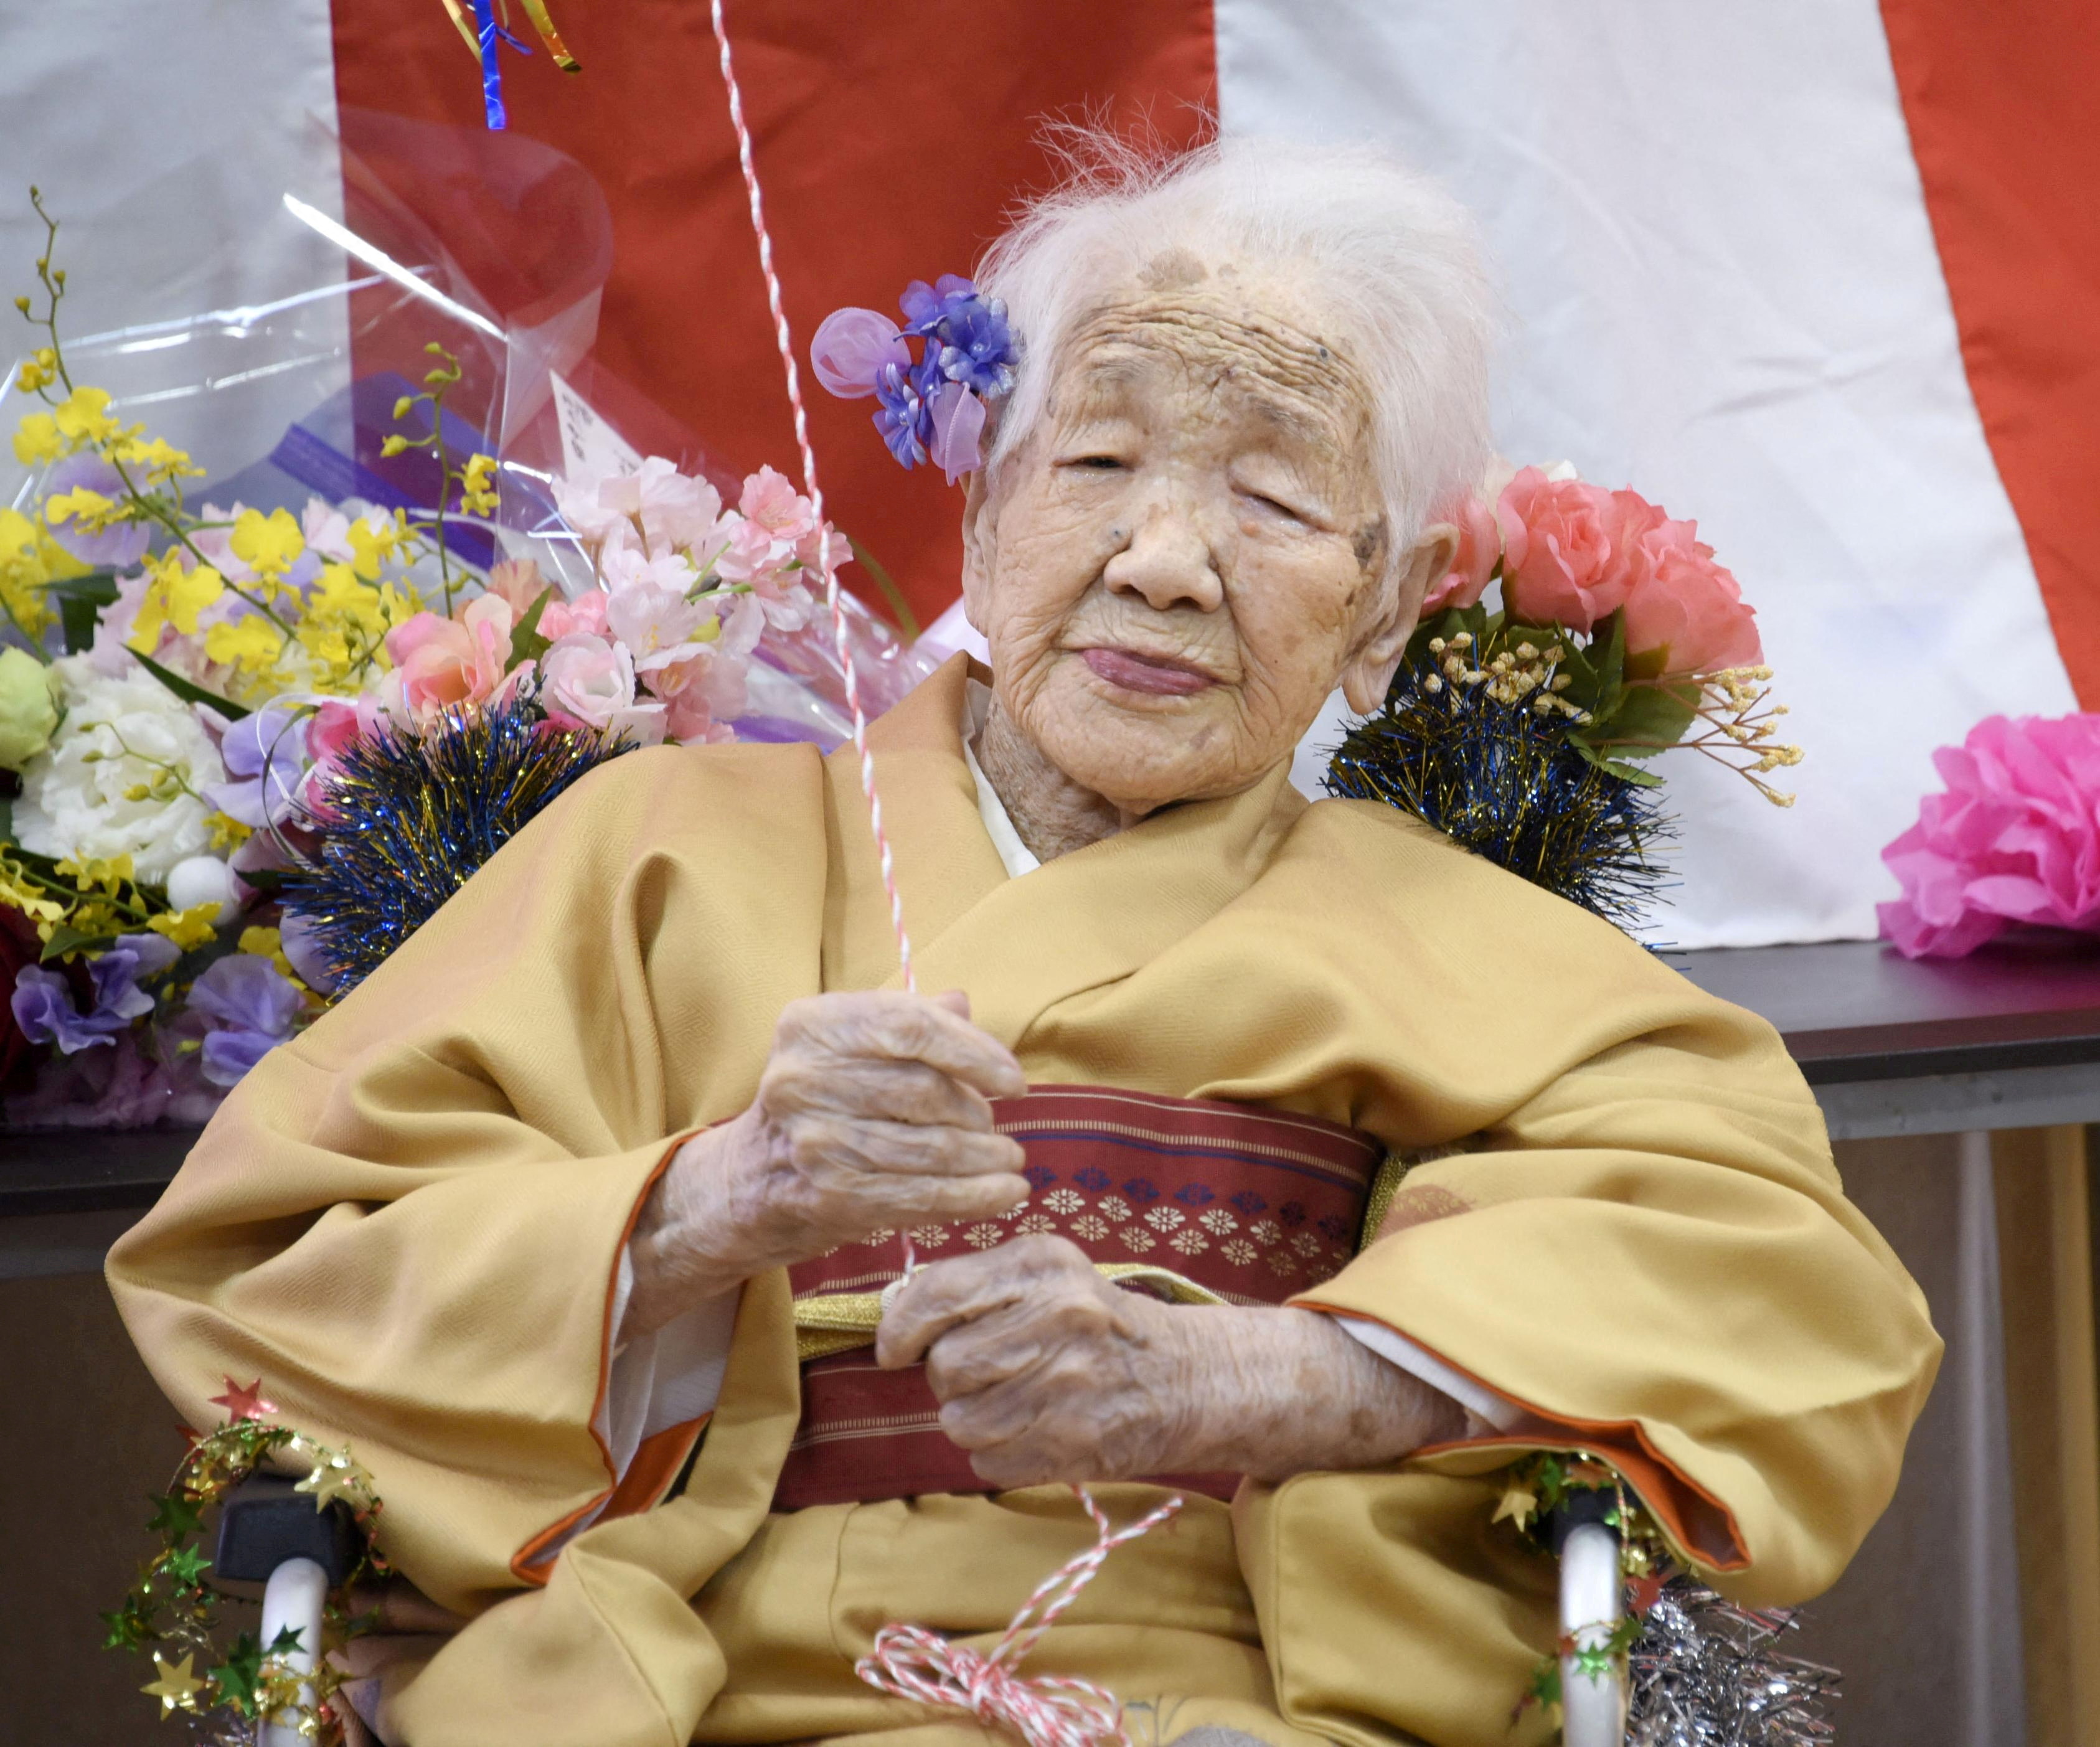 FILE PHOTO: Kane Tanaka, born in 1903, smiles as a nursing home celebrates three days after her 117th birthday in Fukuoka, Japan, in this photo taken by Kyodo January 5, 2020. Mandatory credit Kyodo/via REUTERS ATTENTION EDITORS - THIS IMAGE WAS PROVIDED BY A THIRD PARTY. MANDATORY CREDIT. JAPAN OUT. NO COMMERCIAL OR EDITORIAL SALES IN JAPAN/File Photo